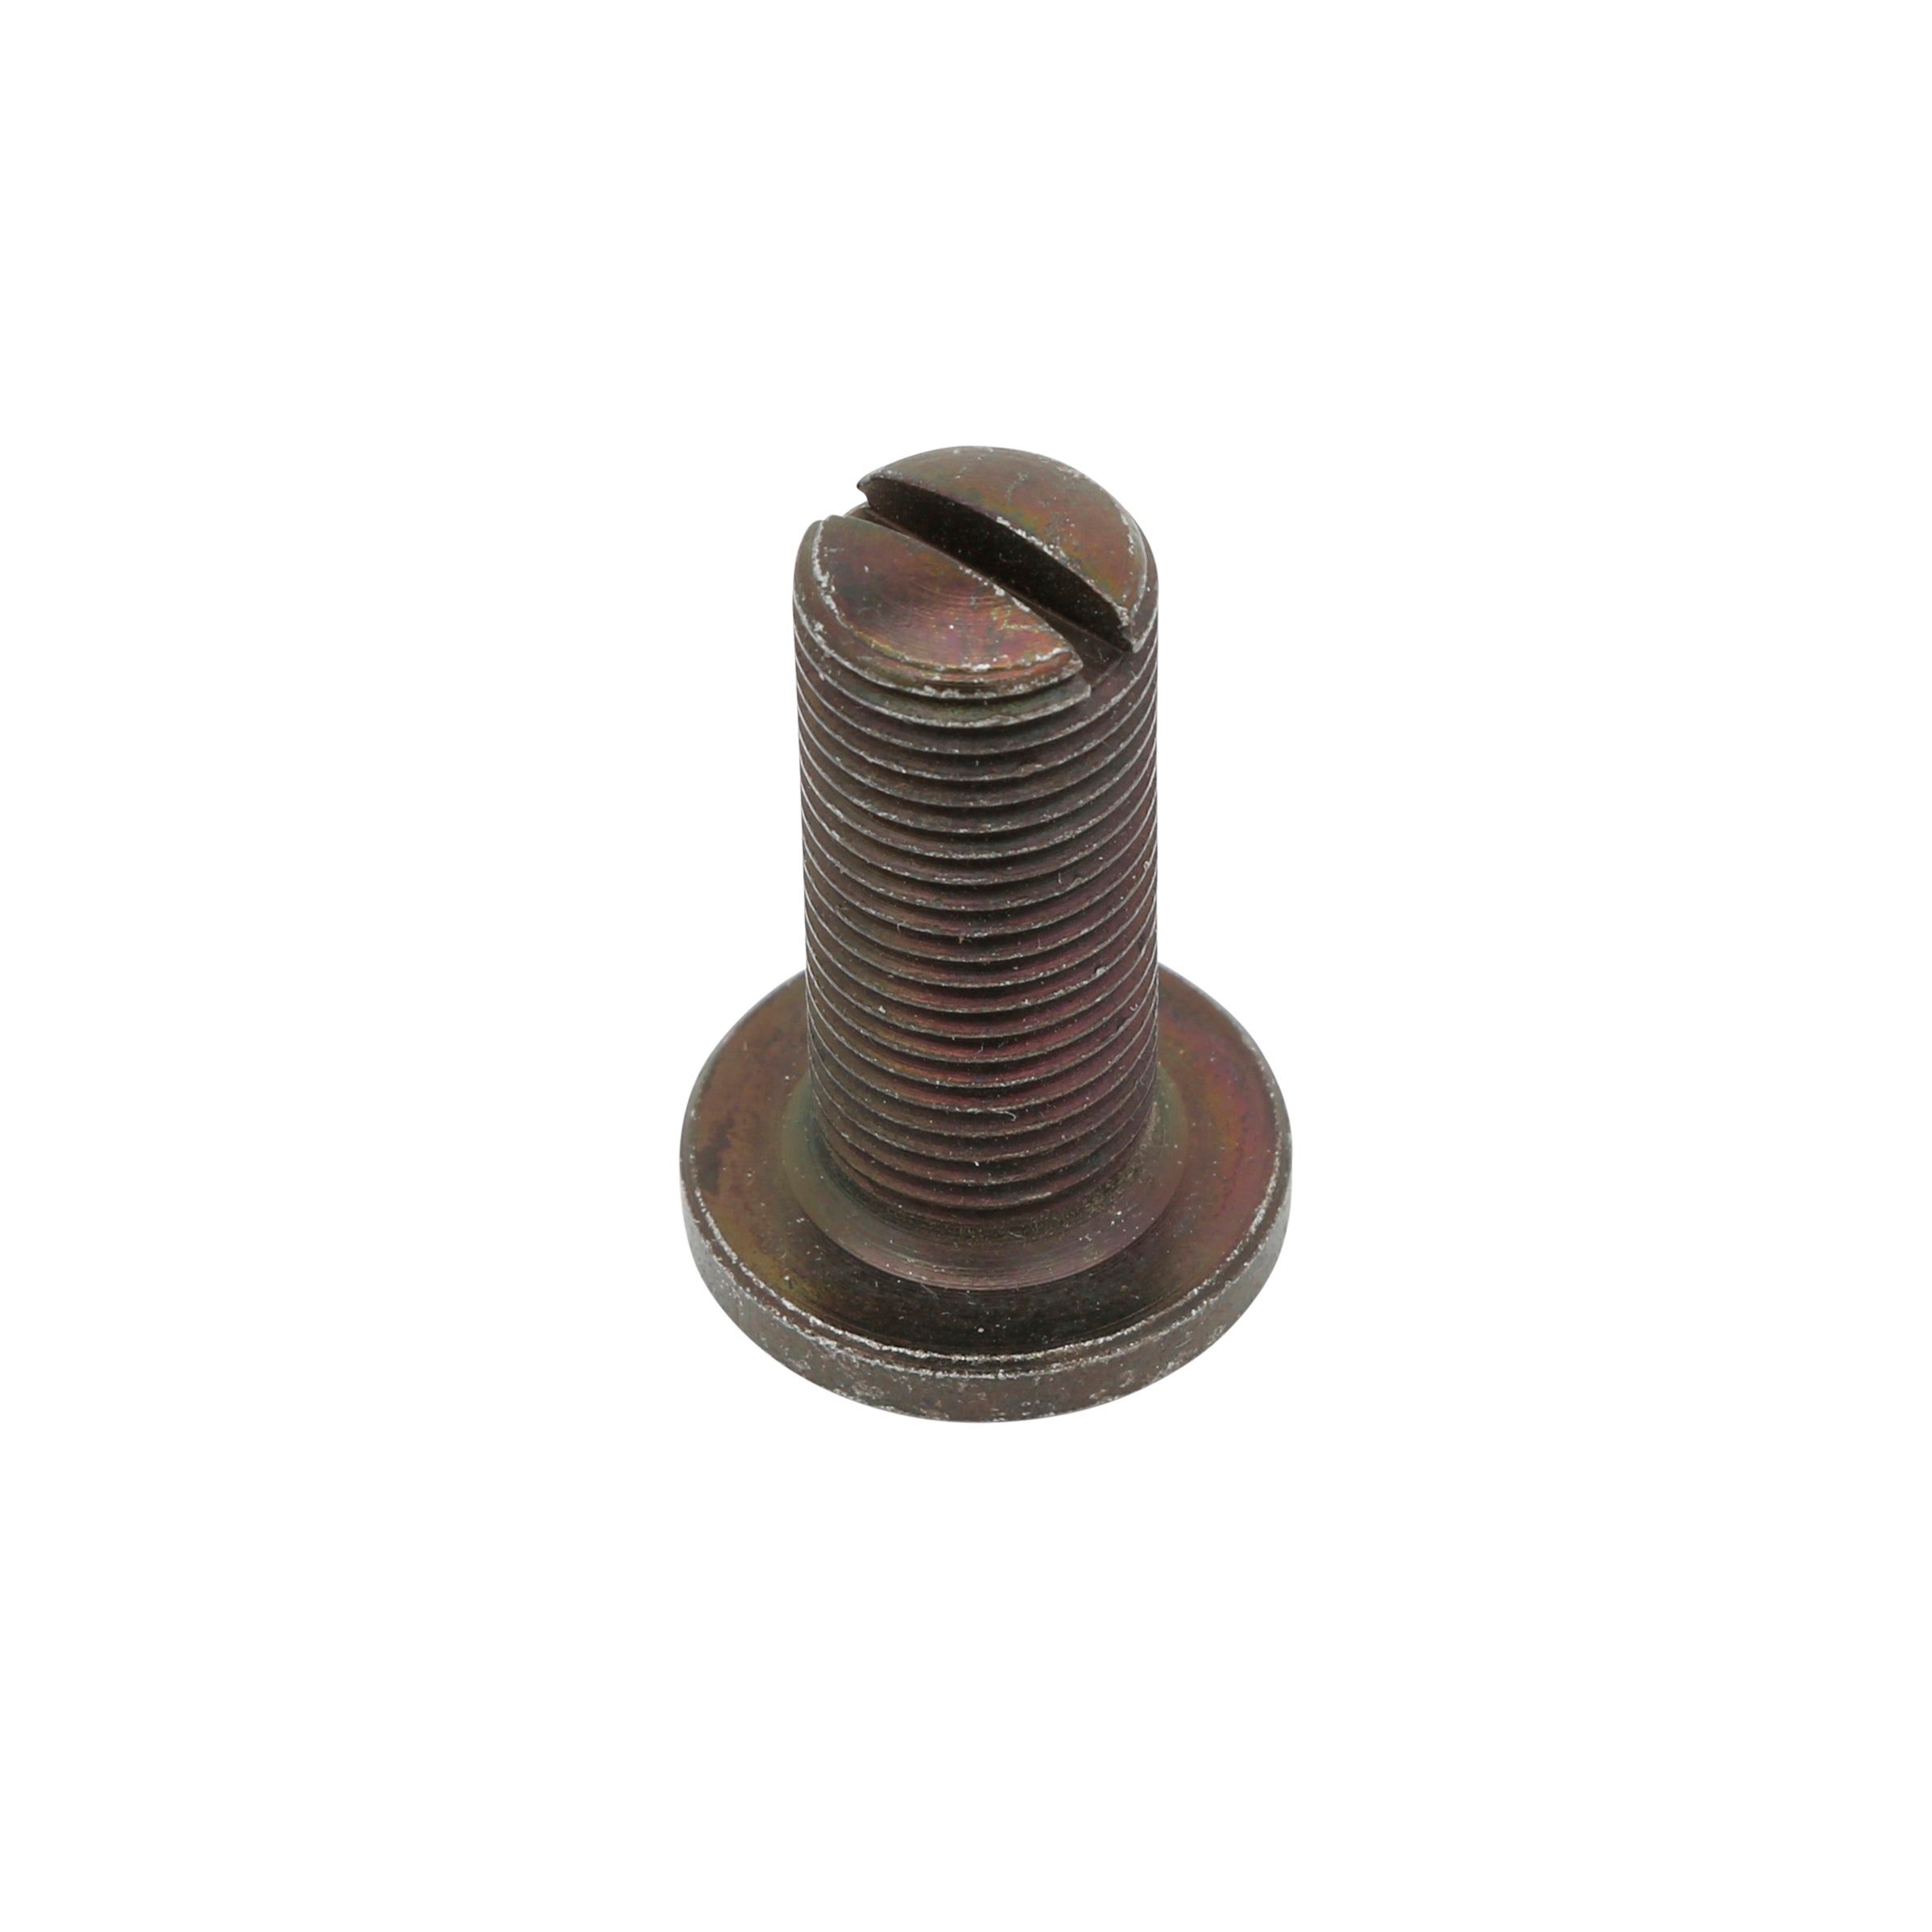 Steering Sector Thrust Screw (7 Tooth) • 1928-29 Model A Ford